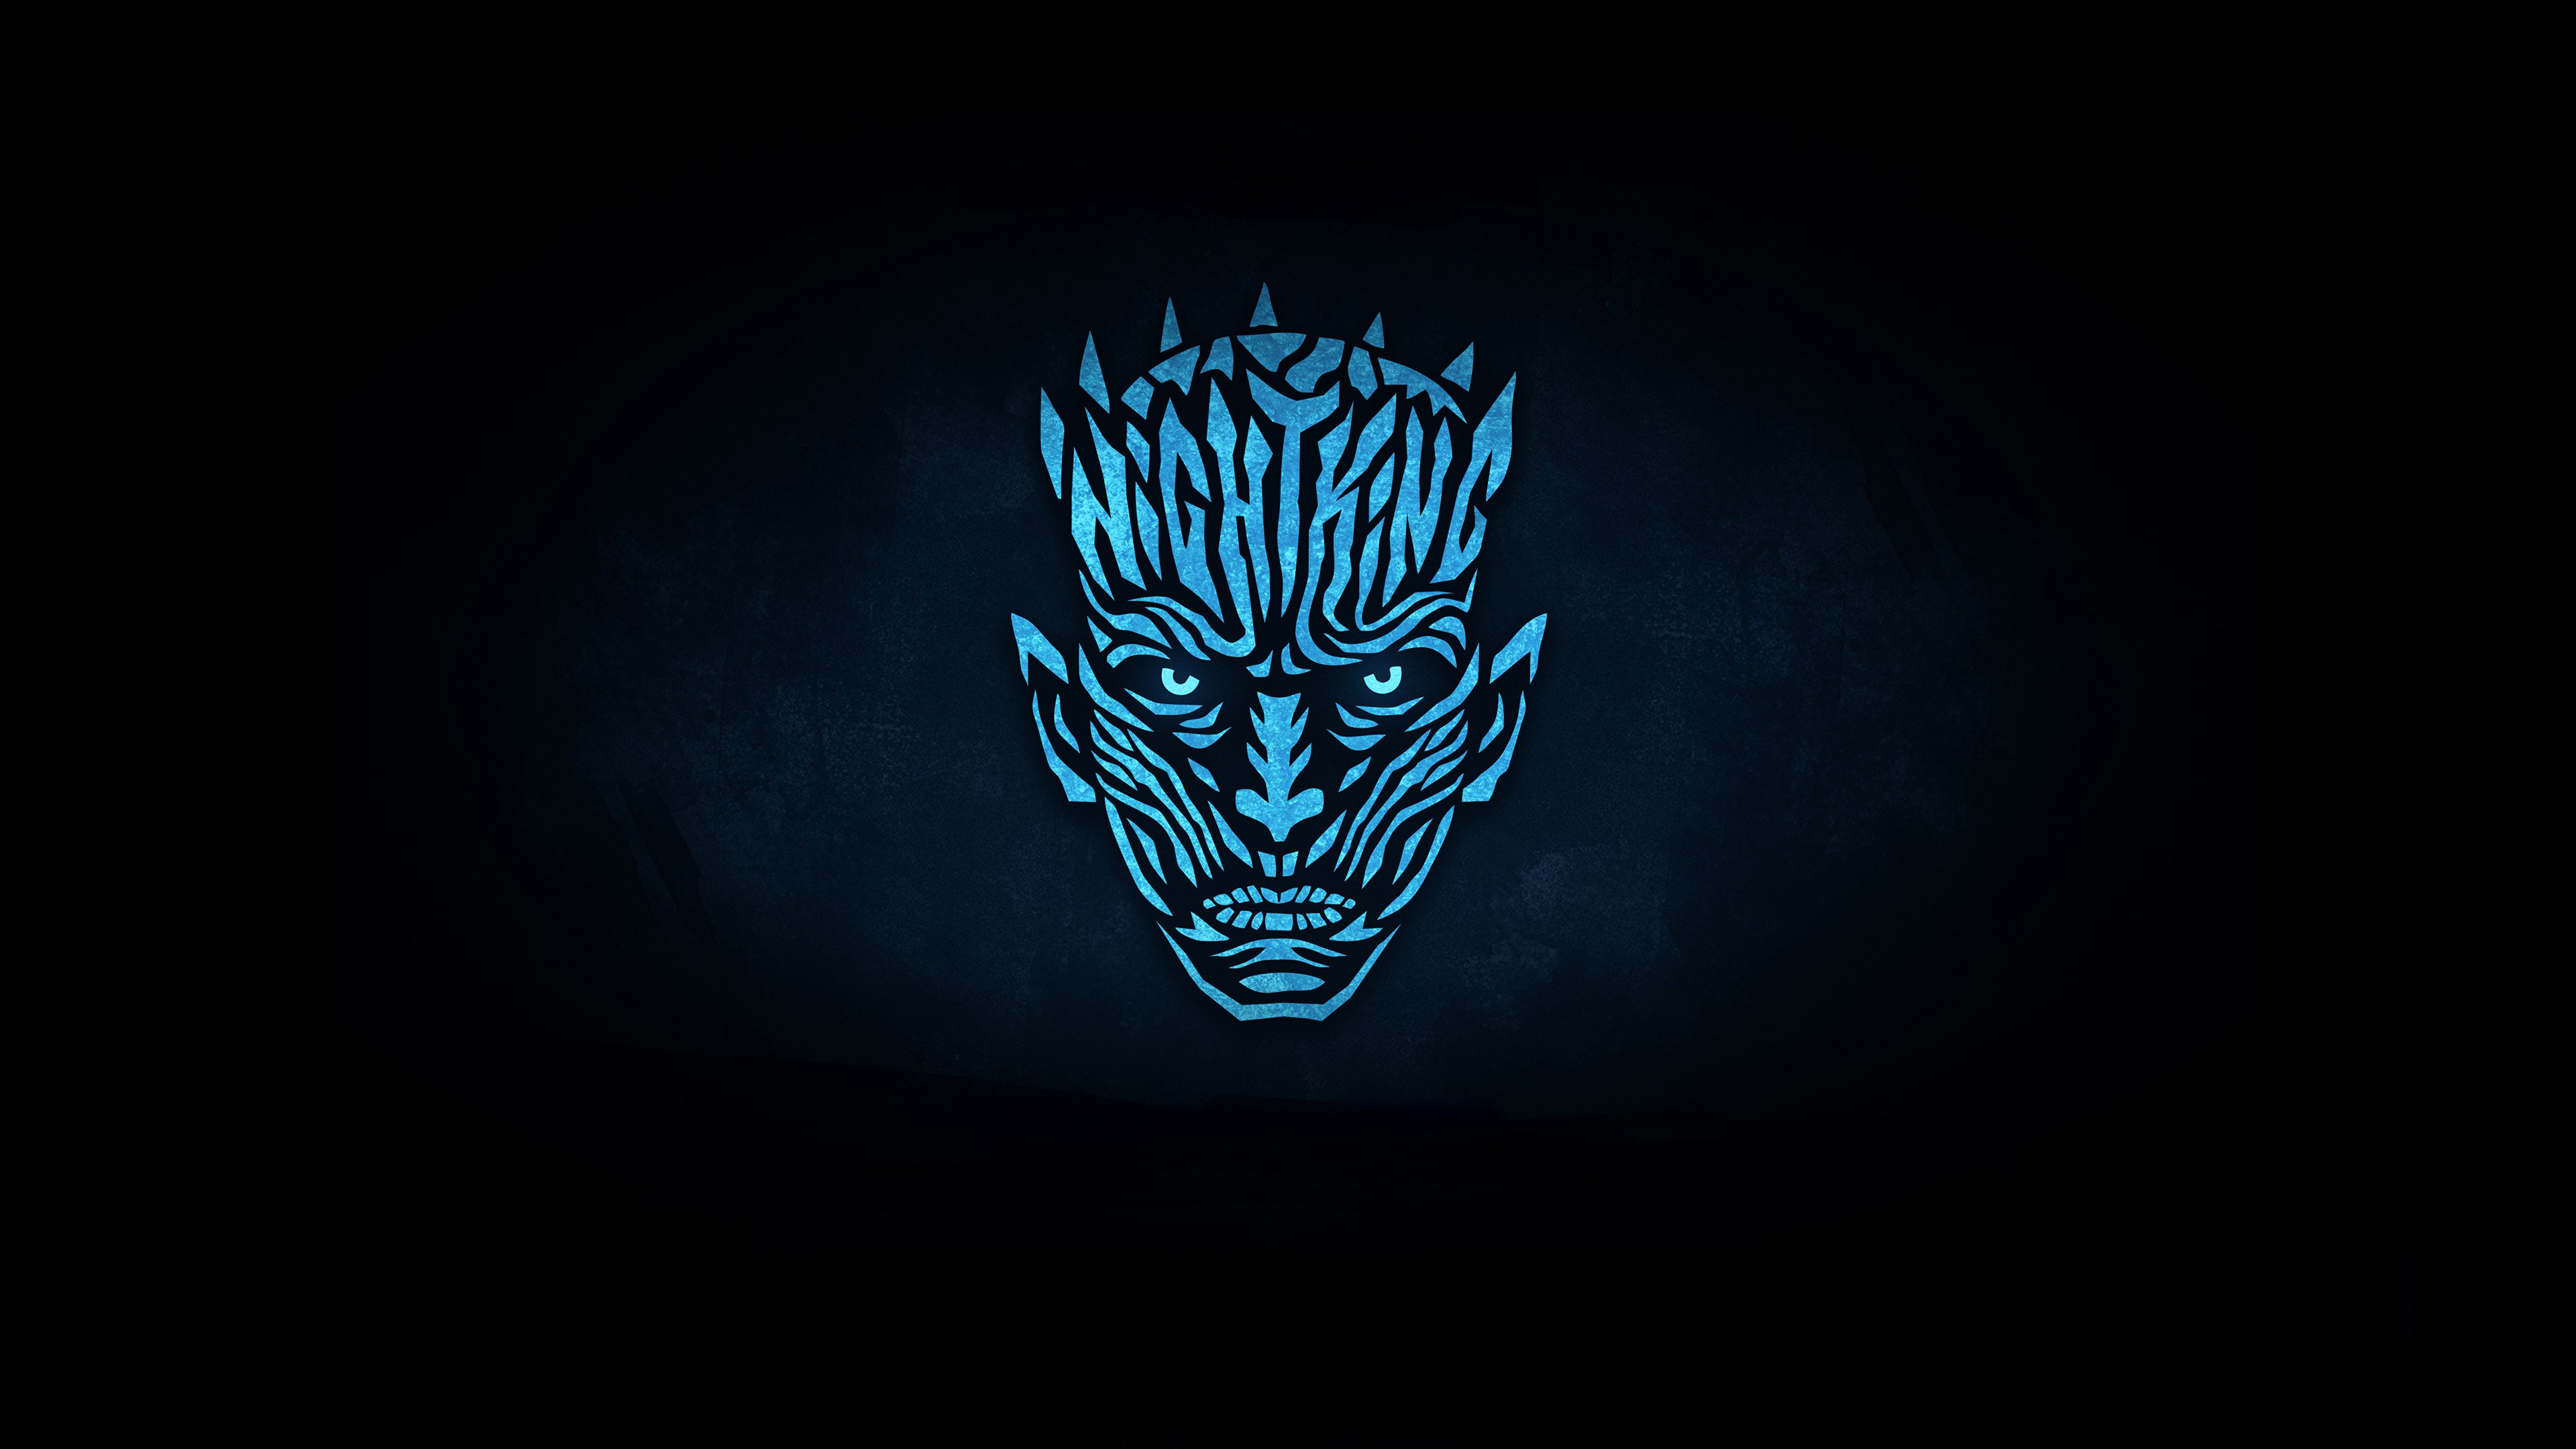 Night King Minimalist From Game Of Thrones Wallpaper, HD